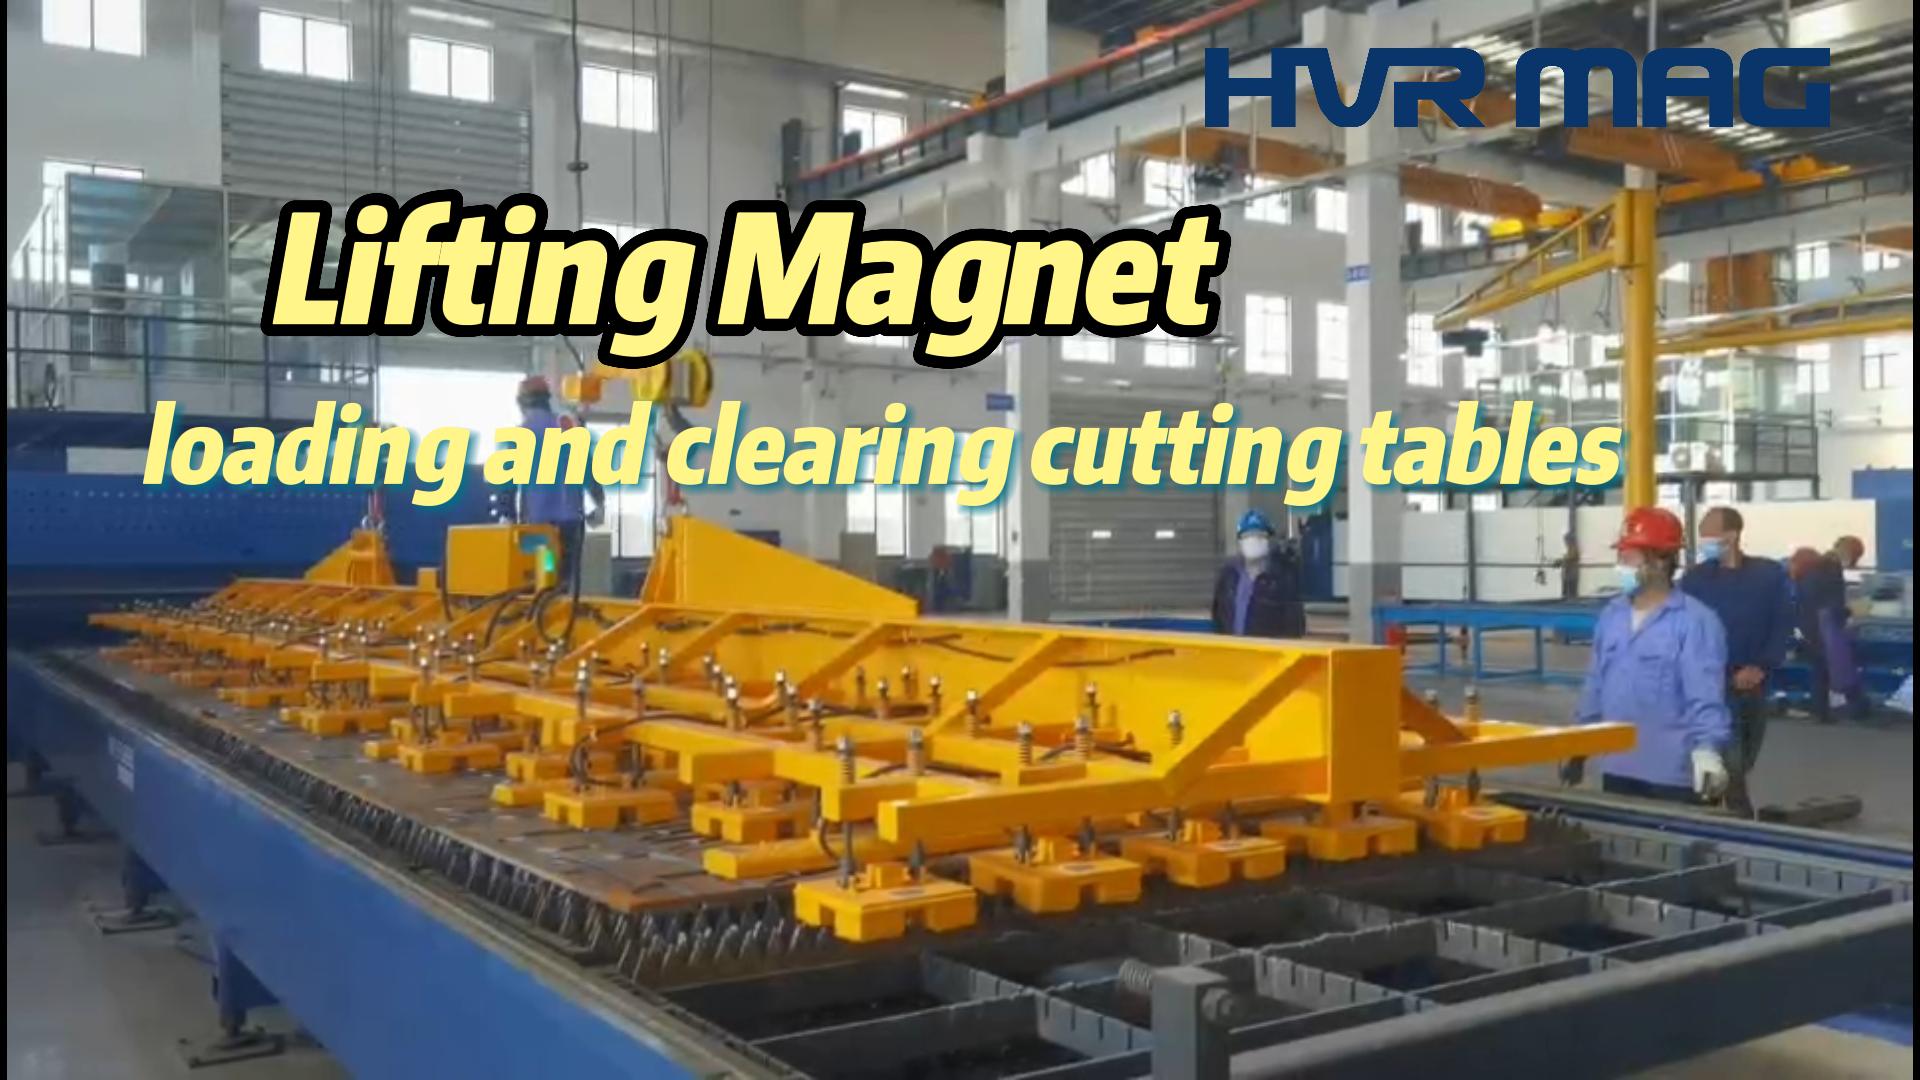 Cutting Table Magnets: HVR MAG lifting magnet for loading and clearing cutting tables